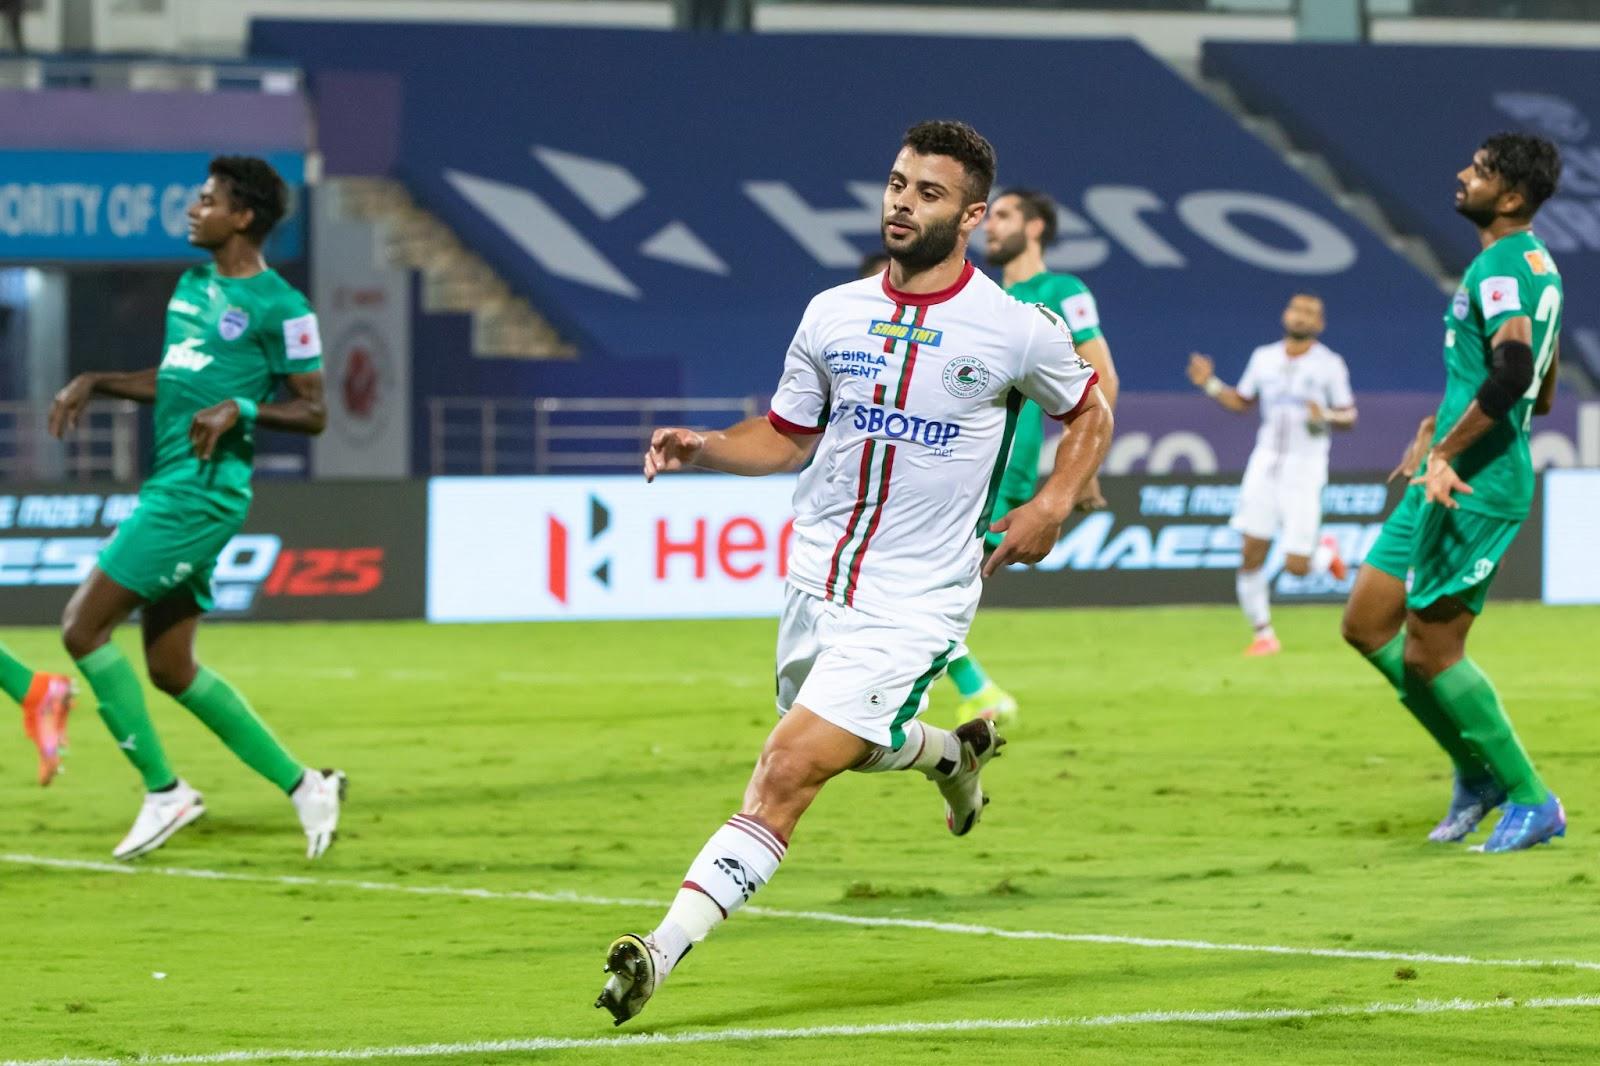 Hugo Boumous scored the second goal for the Mariners 